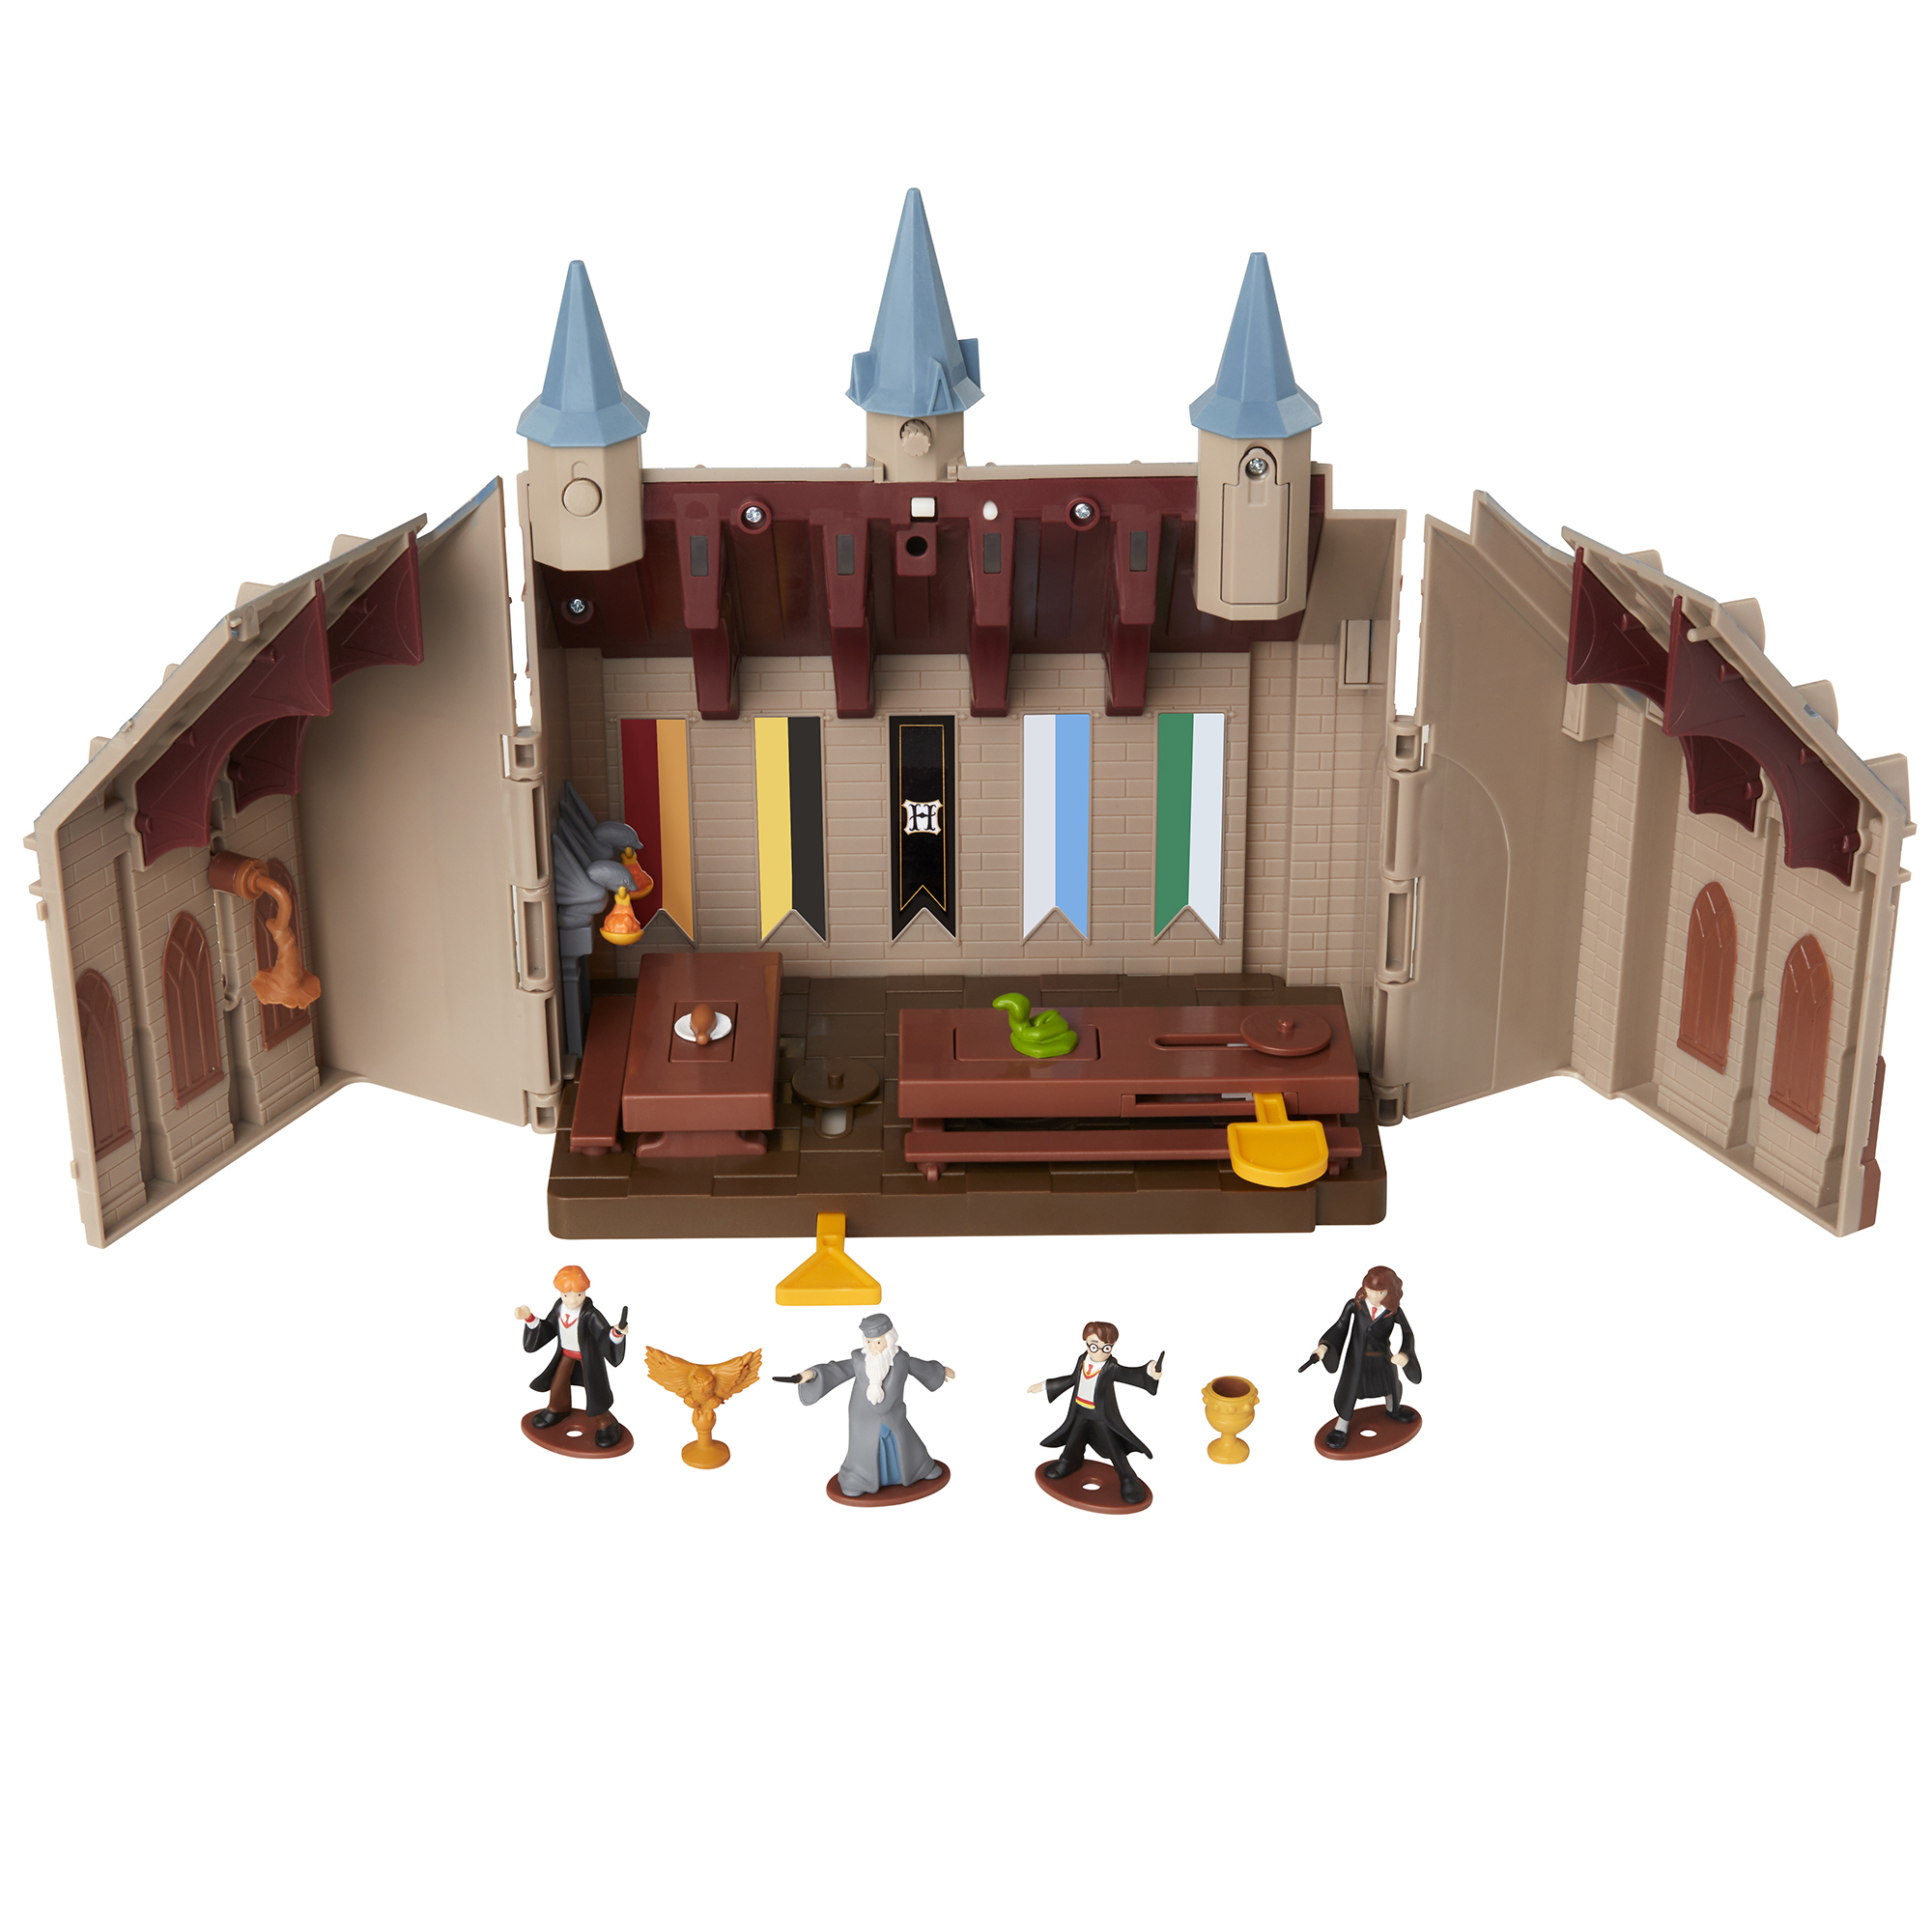 Harry Potter Hogwart's Great Hall Action Figure Set, 9 Pieces - image 1 of 2